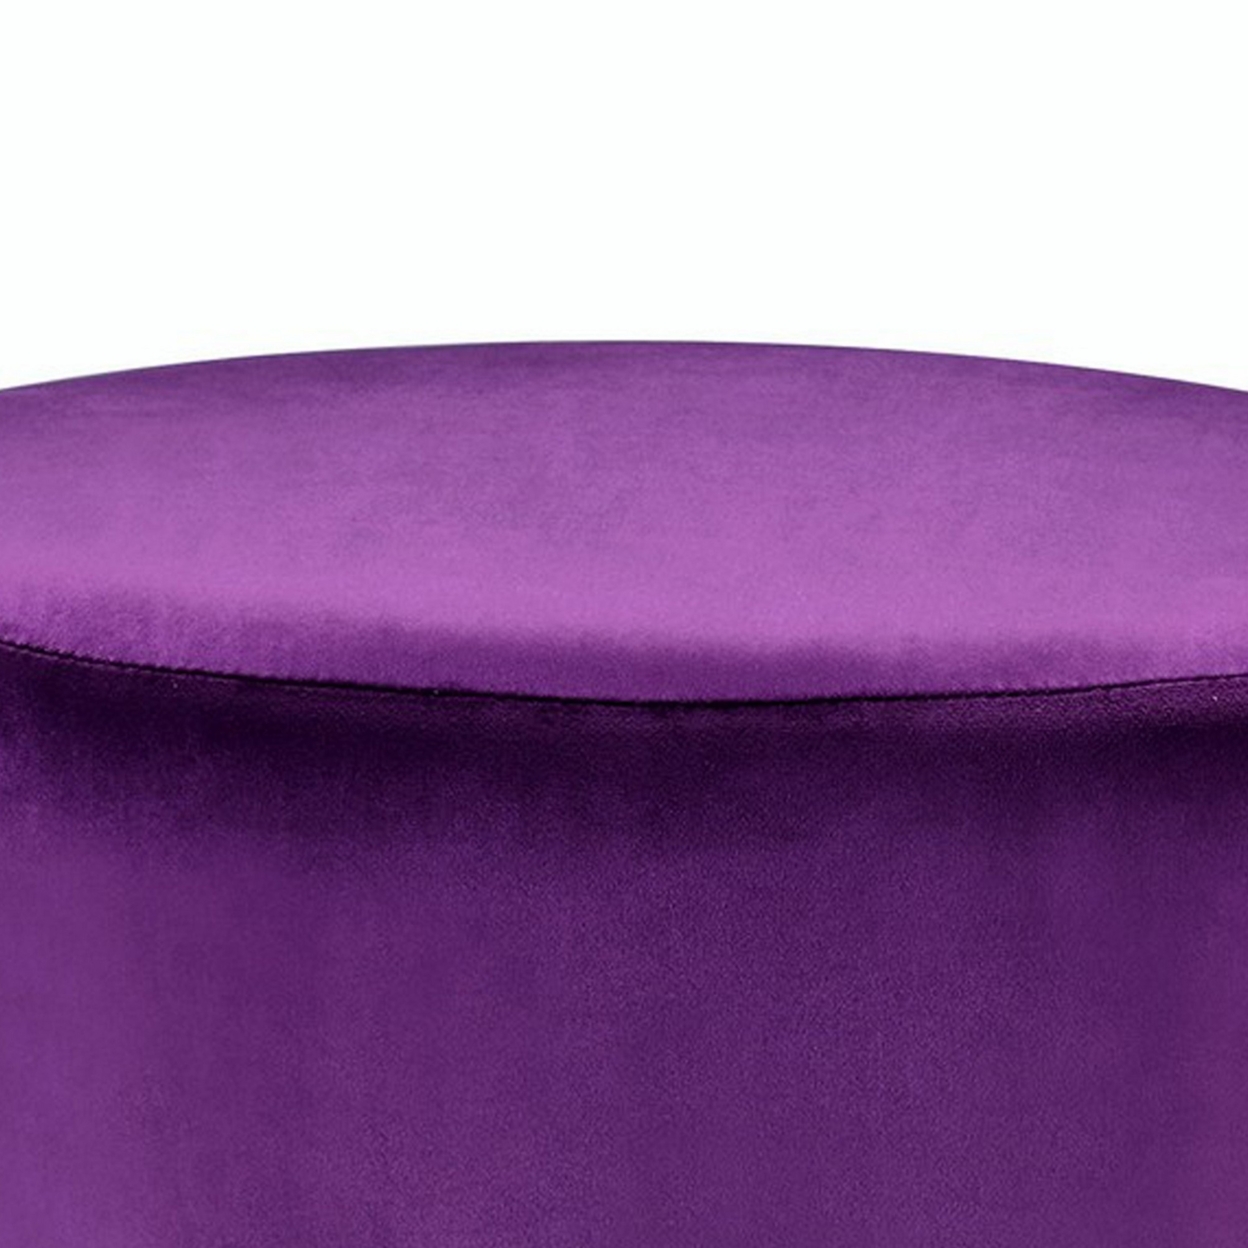 Fabric Upholstered Round Ottoman With Fringes And Metal Base, Purple- Saltoro Sherpi